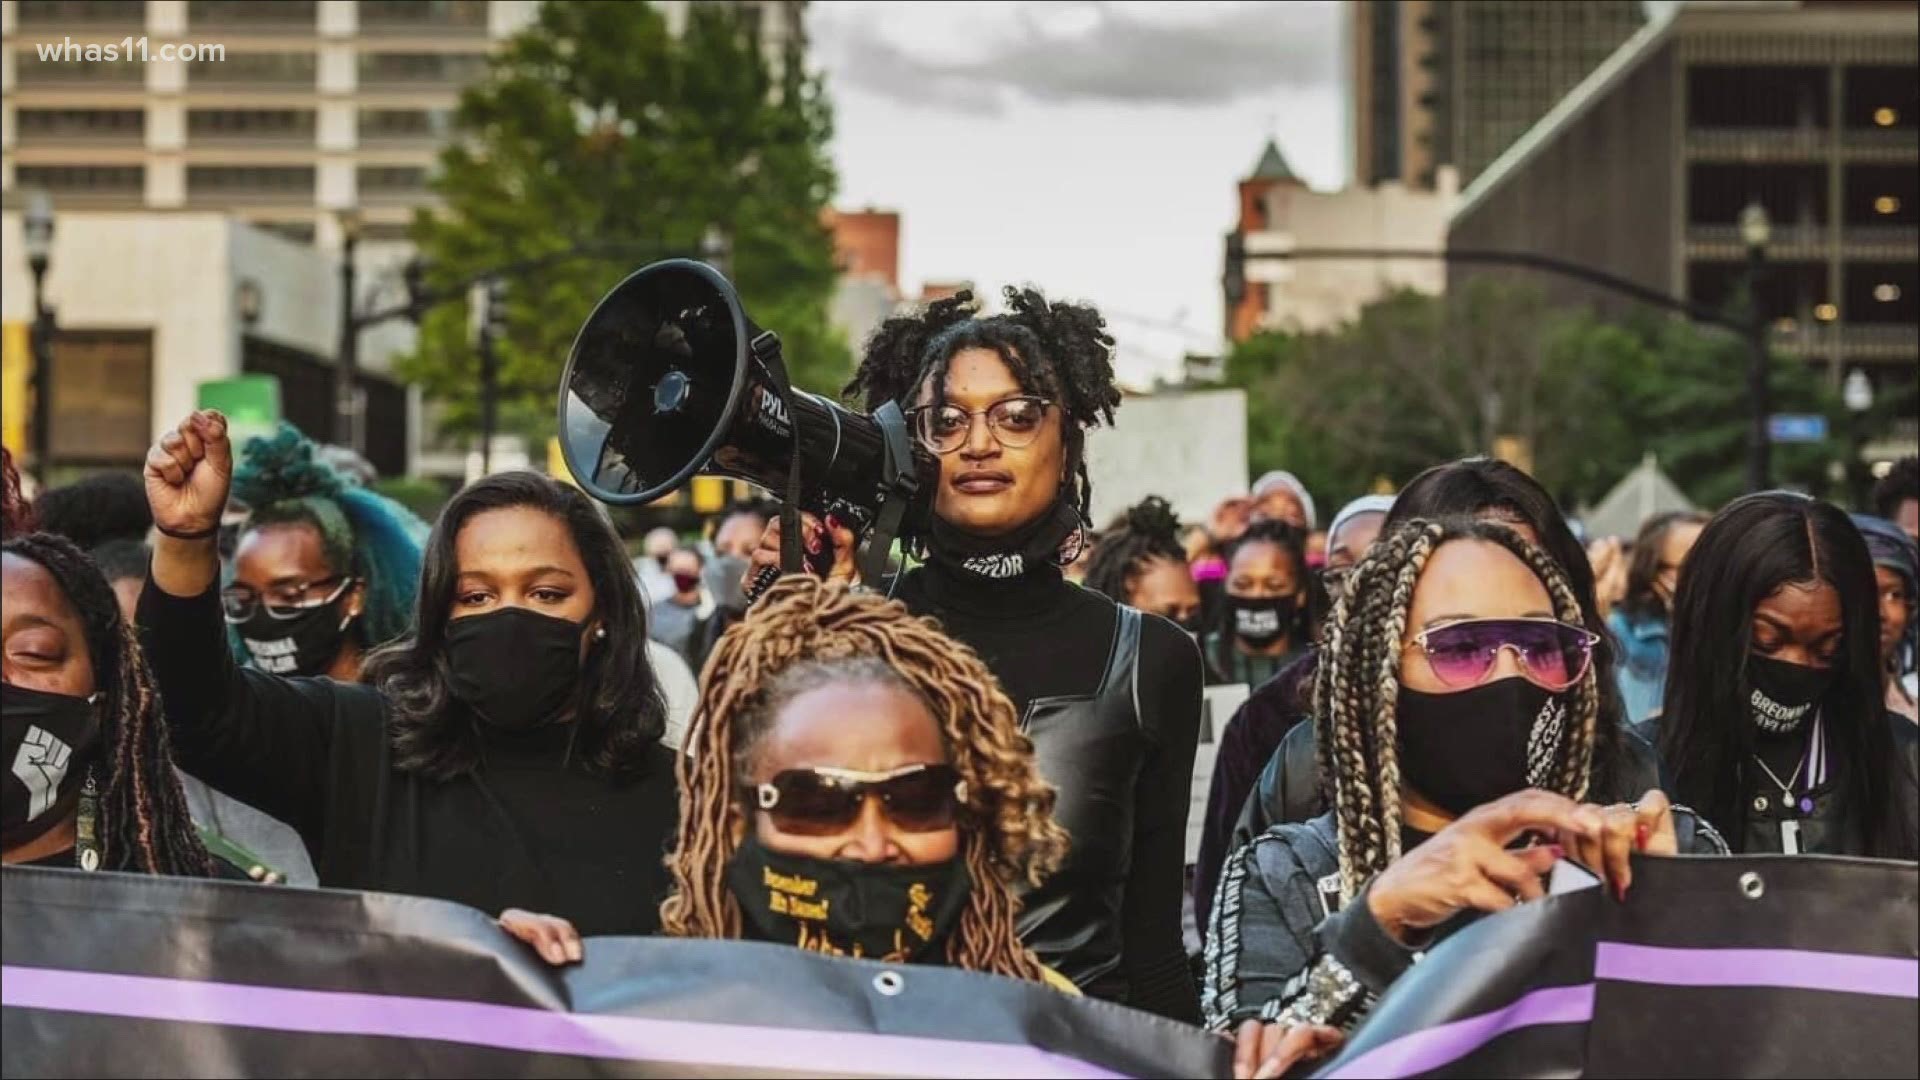 Many people in our area took their fight for justice to the streets -- Marching, chanting and protesting. And through those protests, new community leaders emerged.